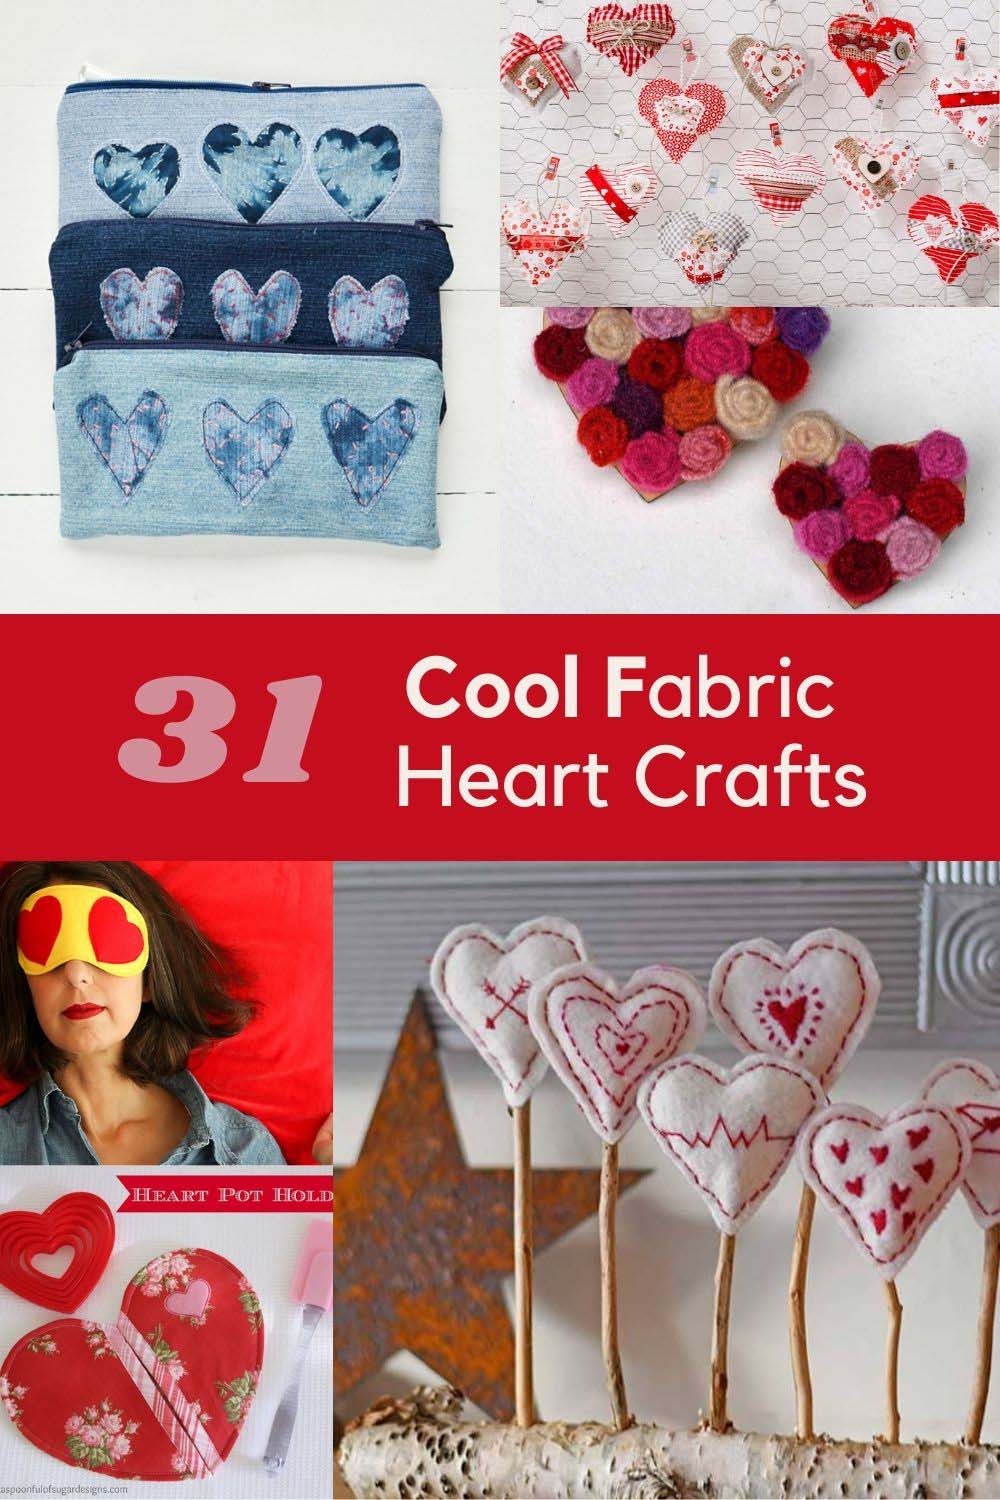 coo fabric heart crafts